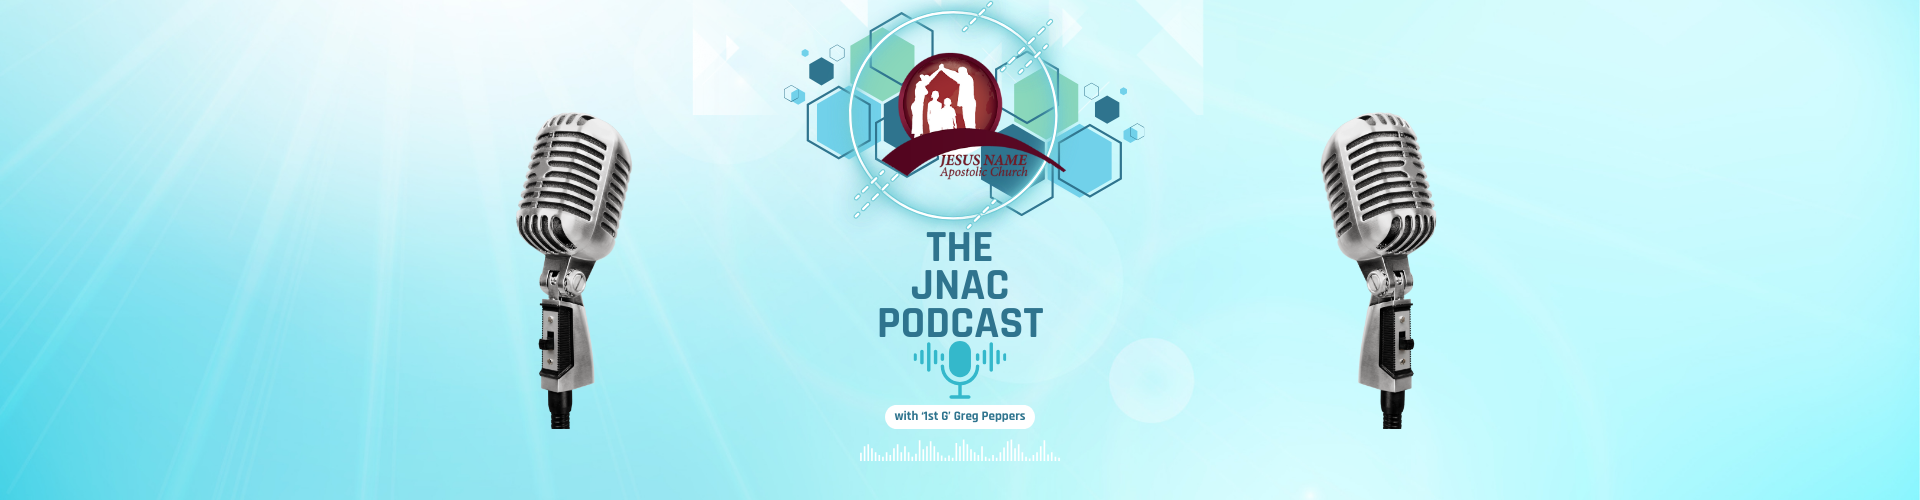 The JNAC podcast